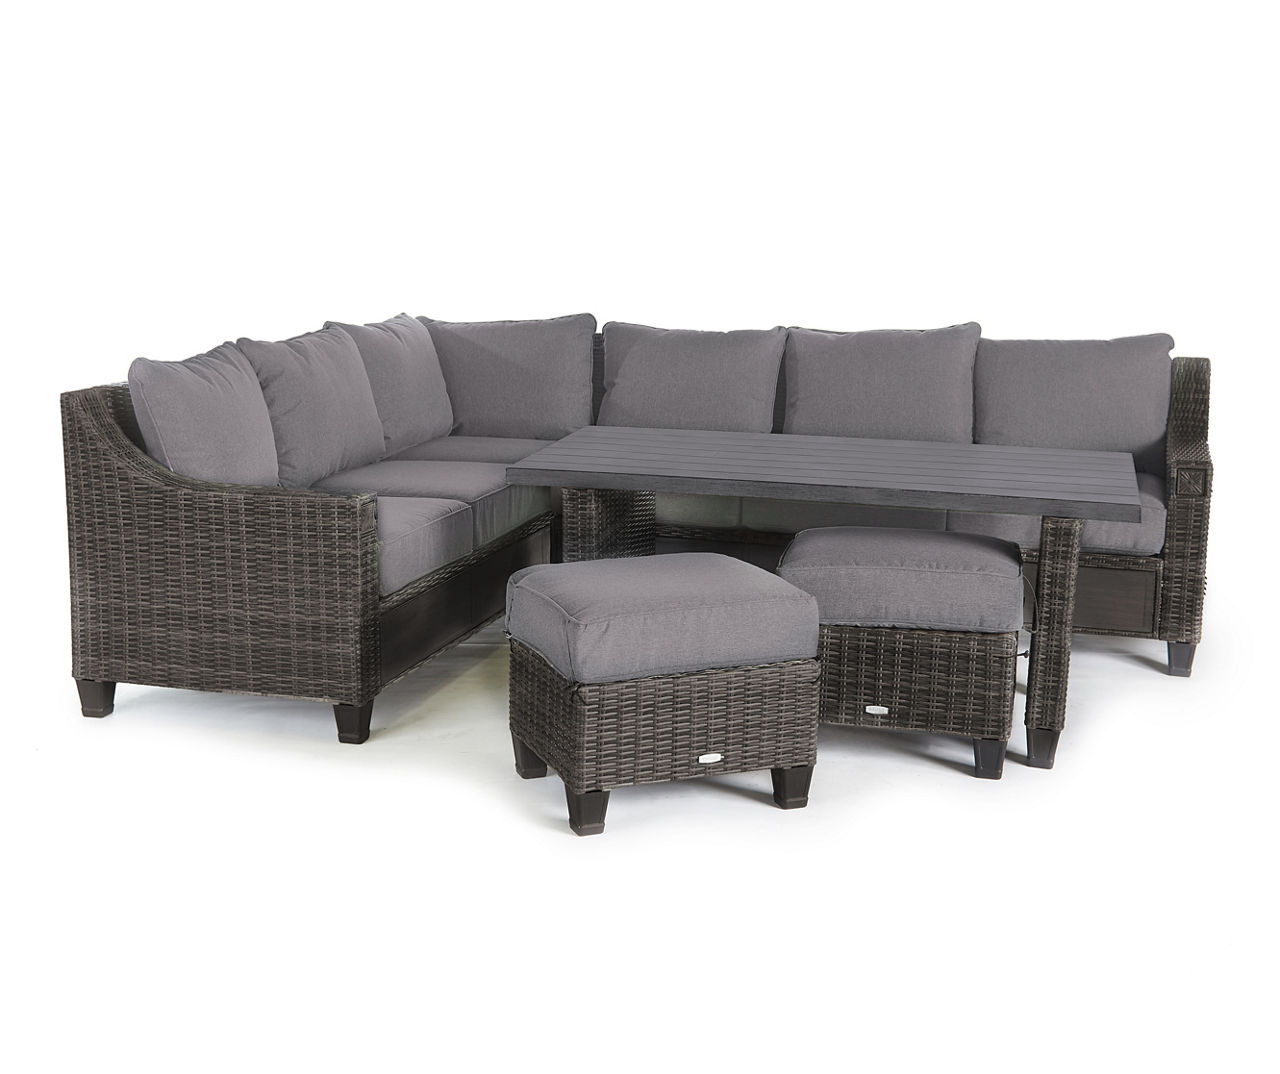 SANDPOINTE 5PC SECTIONAL SET